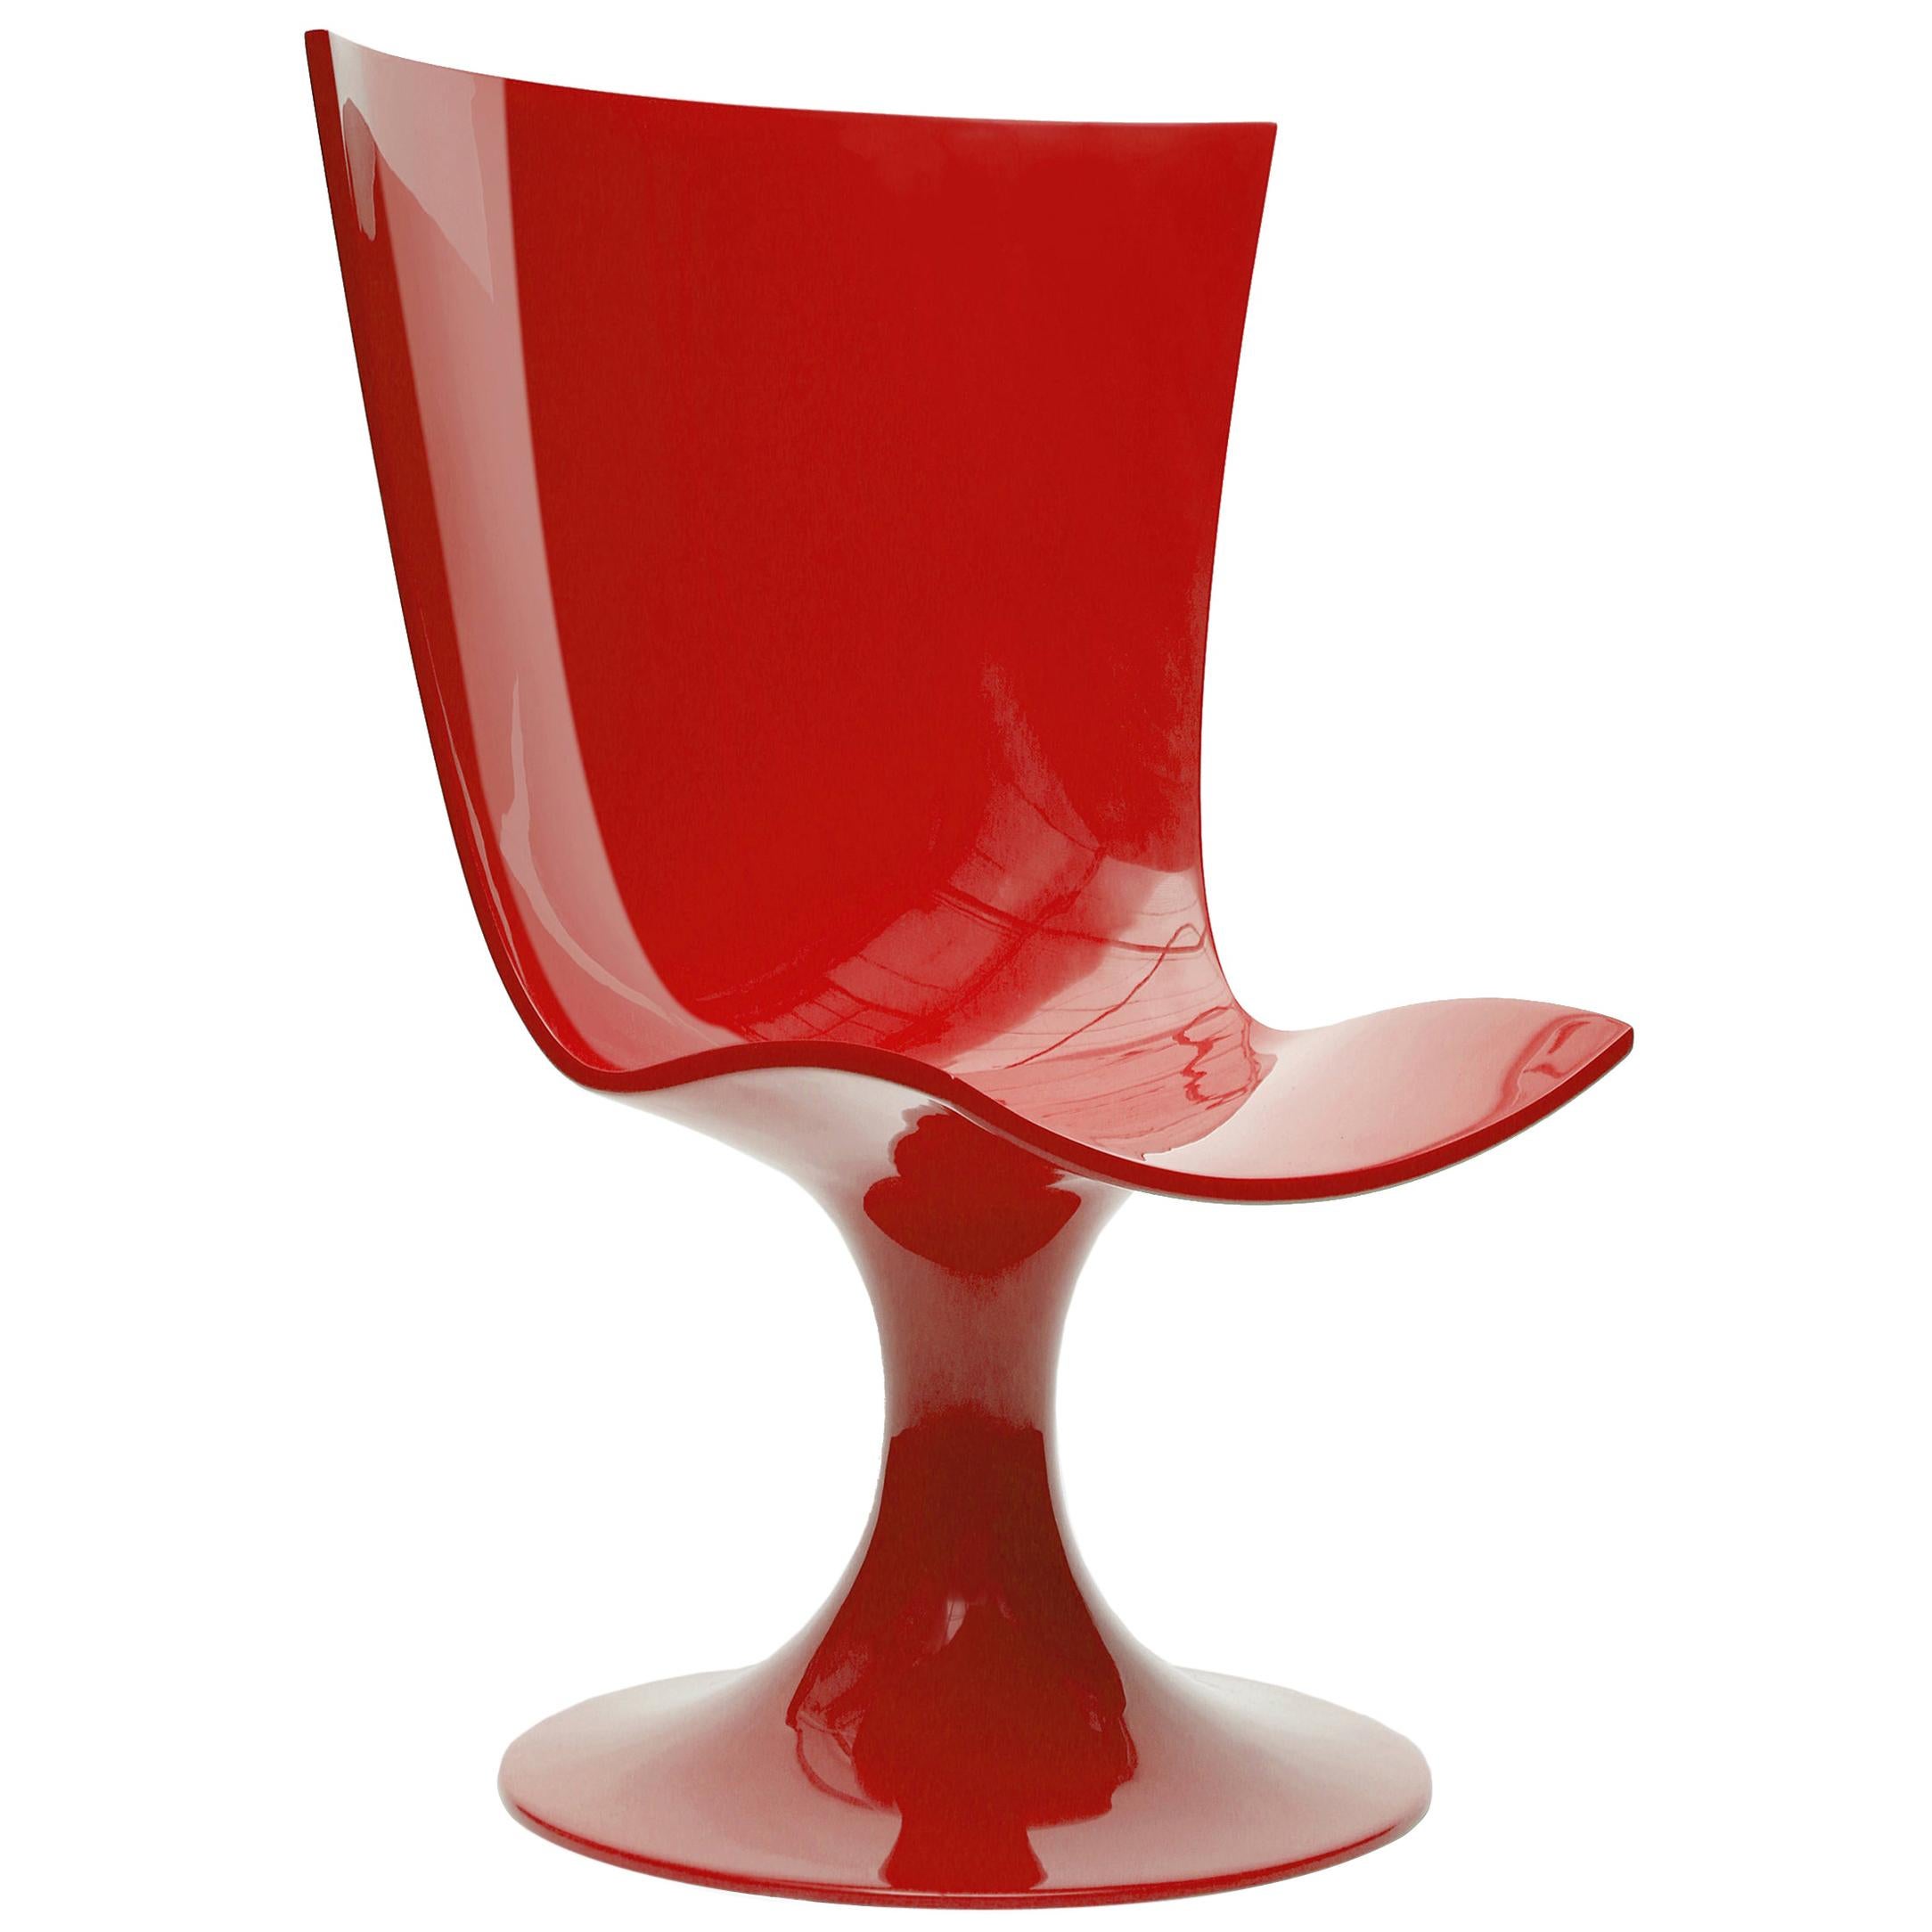 Santos, Imposing Seat, Sculptural Chair in Red by Joel Escalona